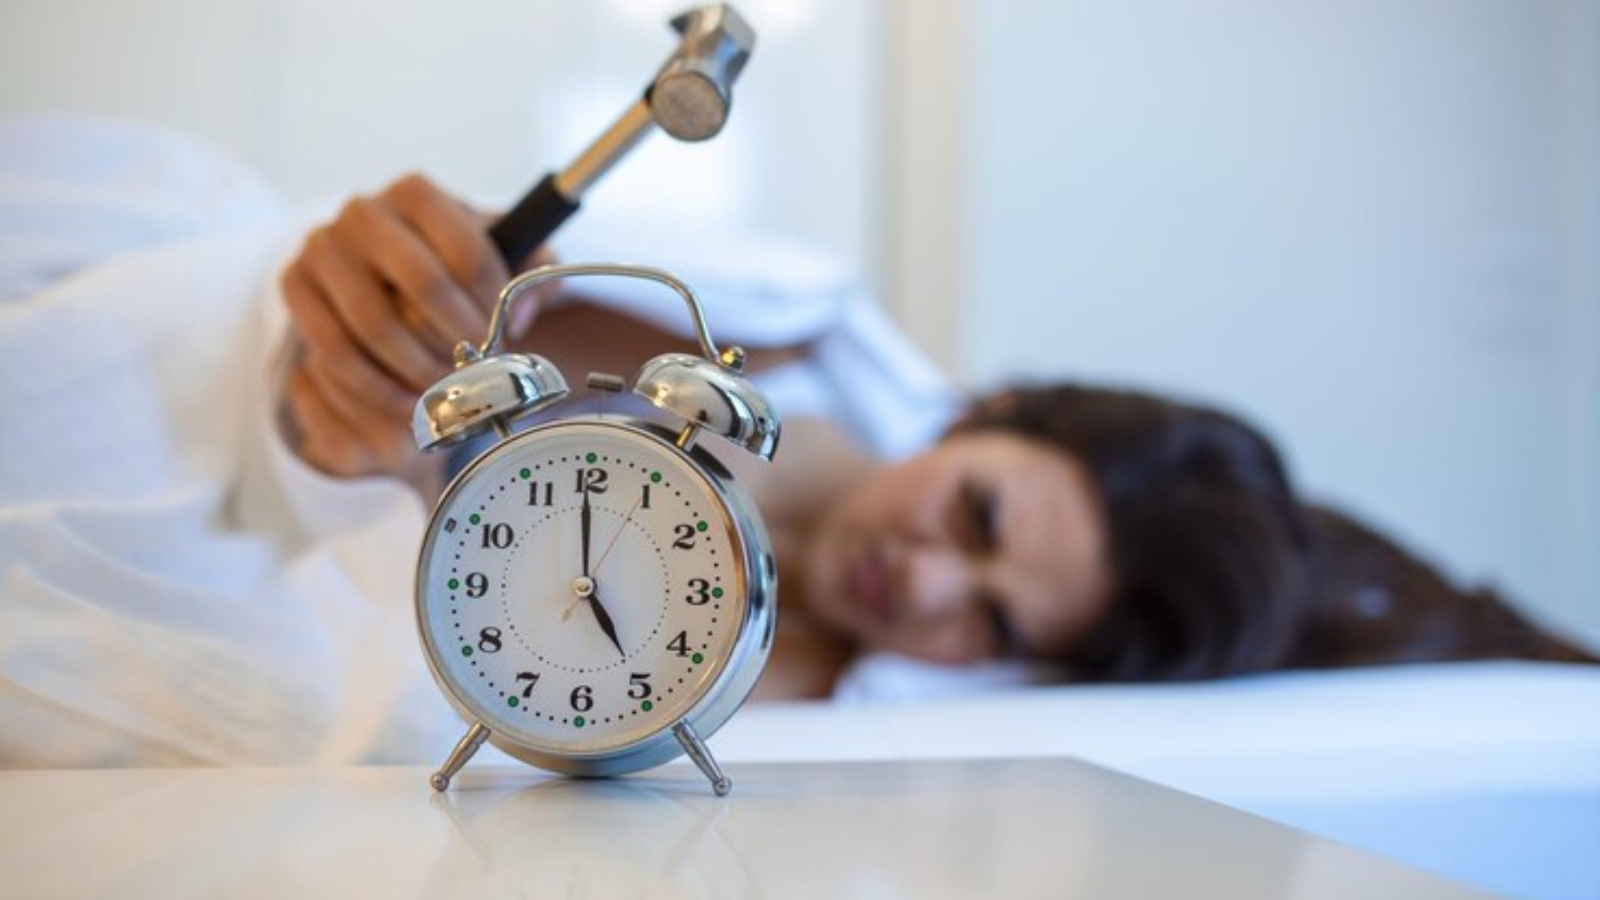 young-woman-tries-break-alarm-clock-with-hammer-destroy-clock-girl-lying-bed-turning-off-alarm-clock-with-hammer-morning-5am_657921-129-jpg-740×493-